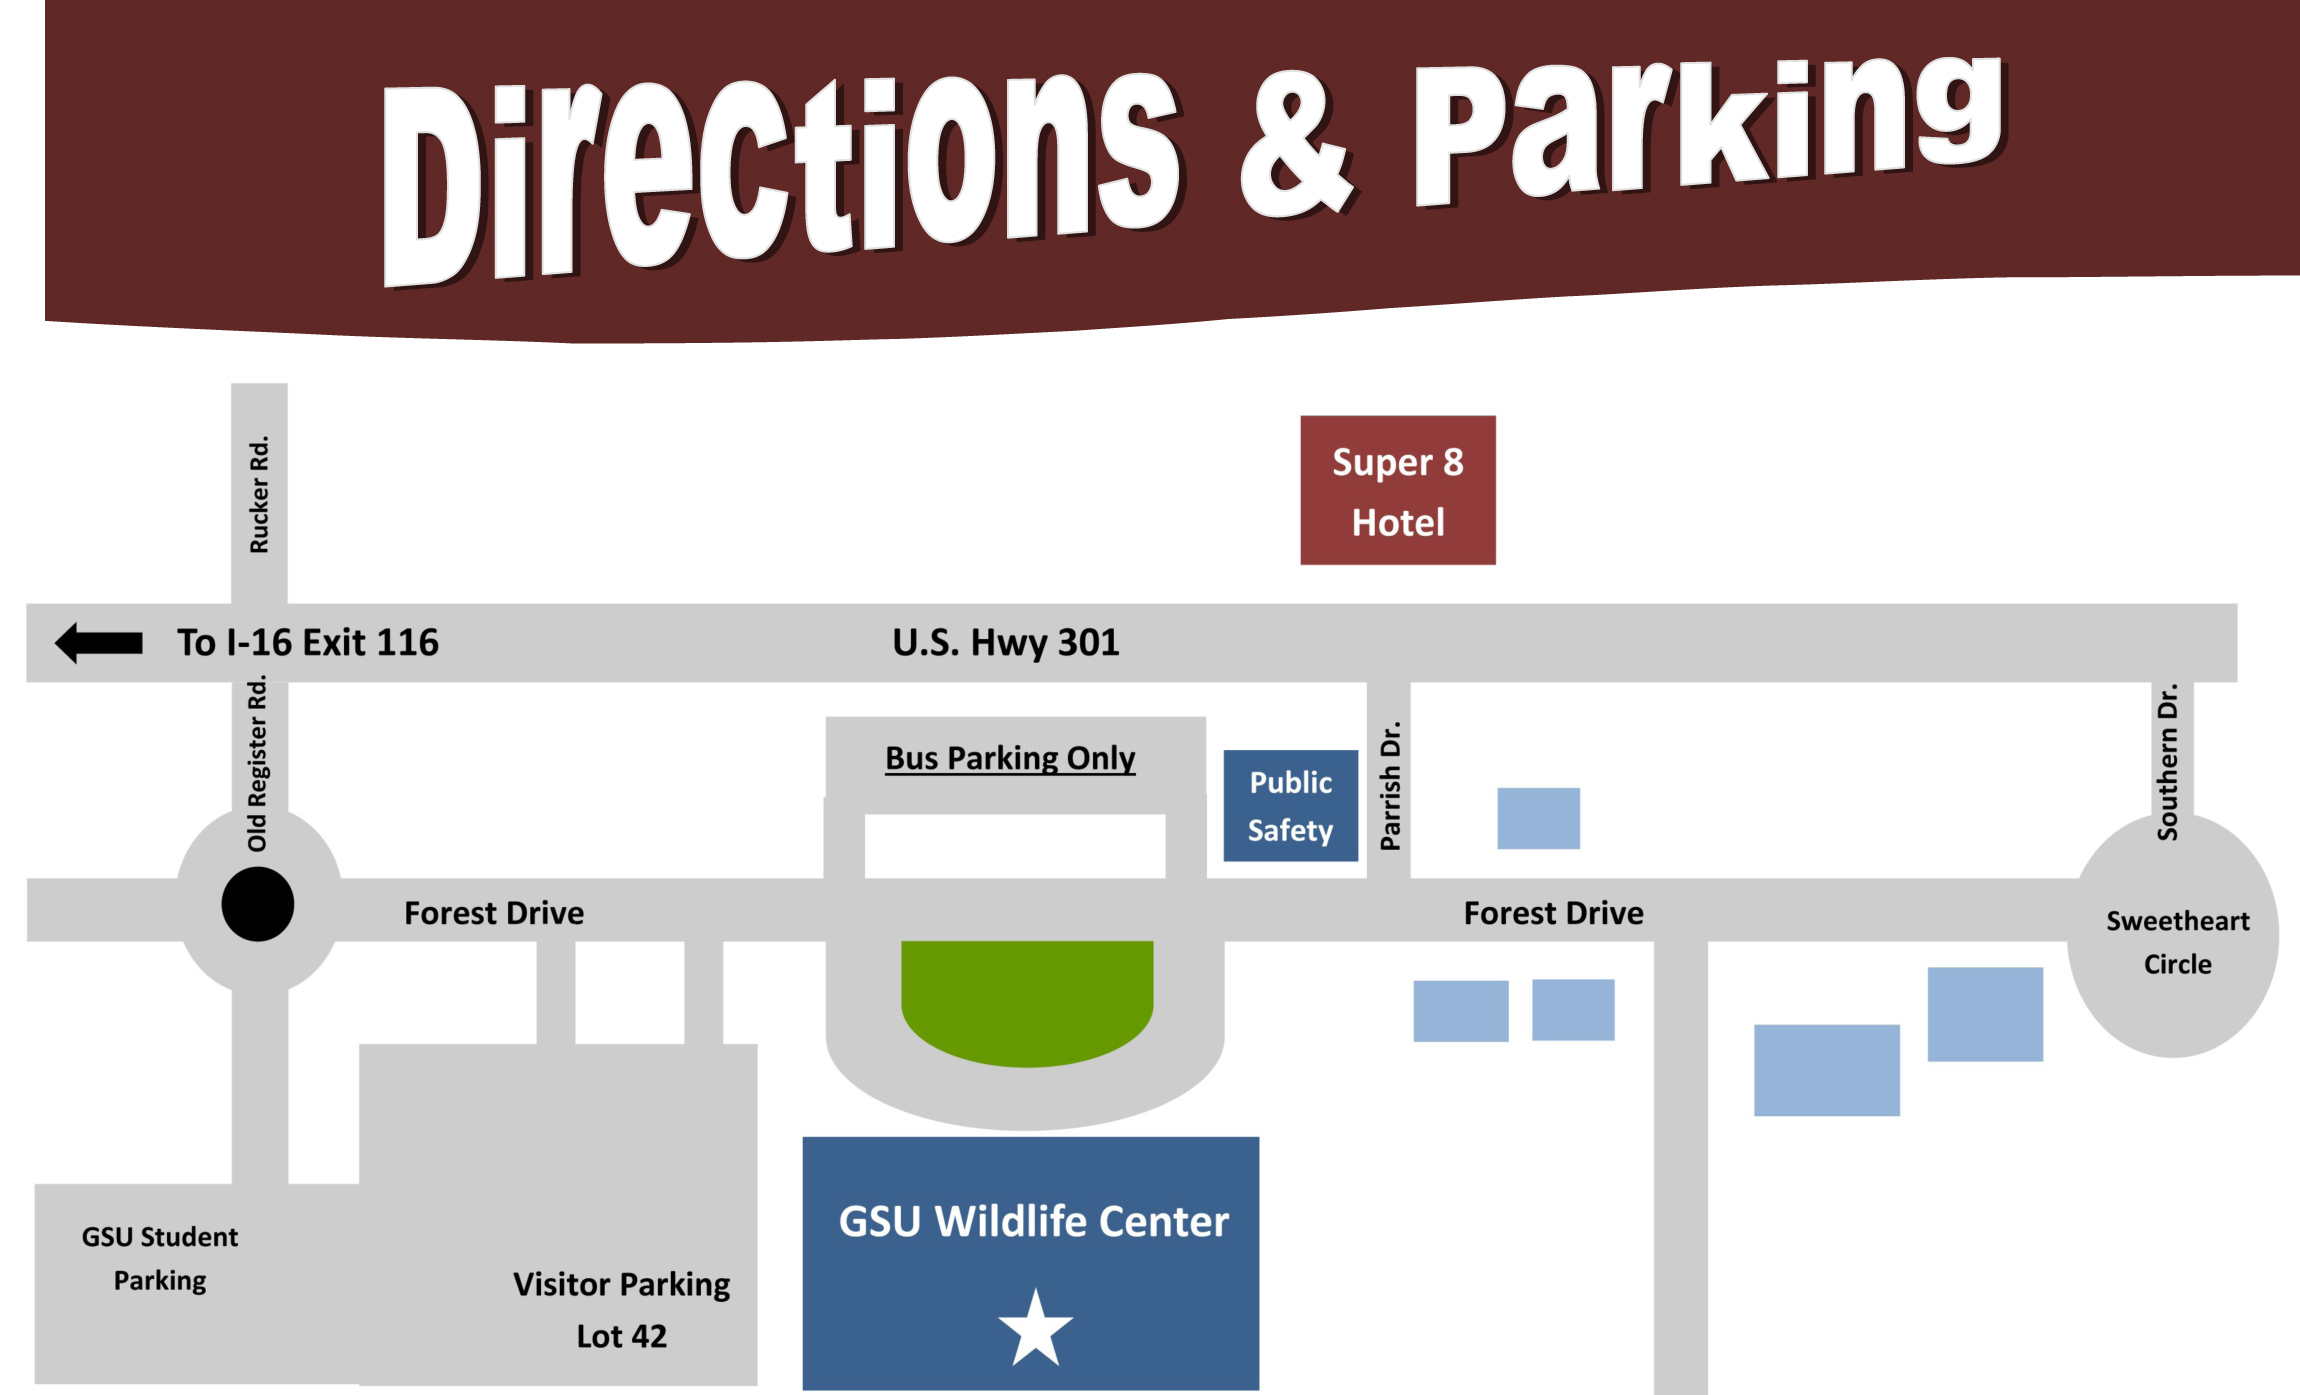 directions and parking map showing parking availability to the West of the wildlife center.